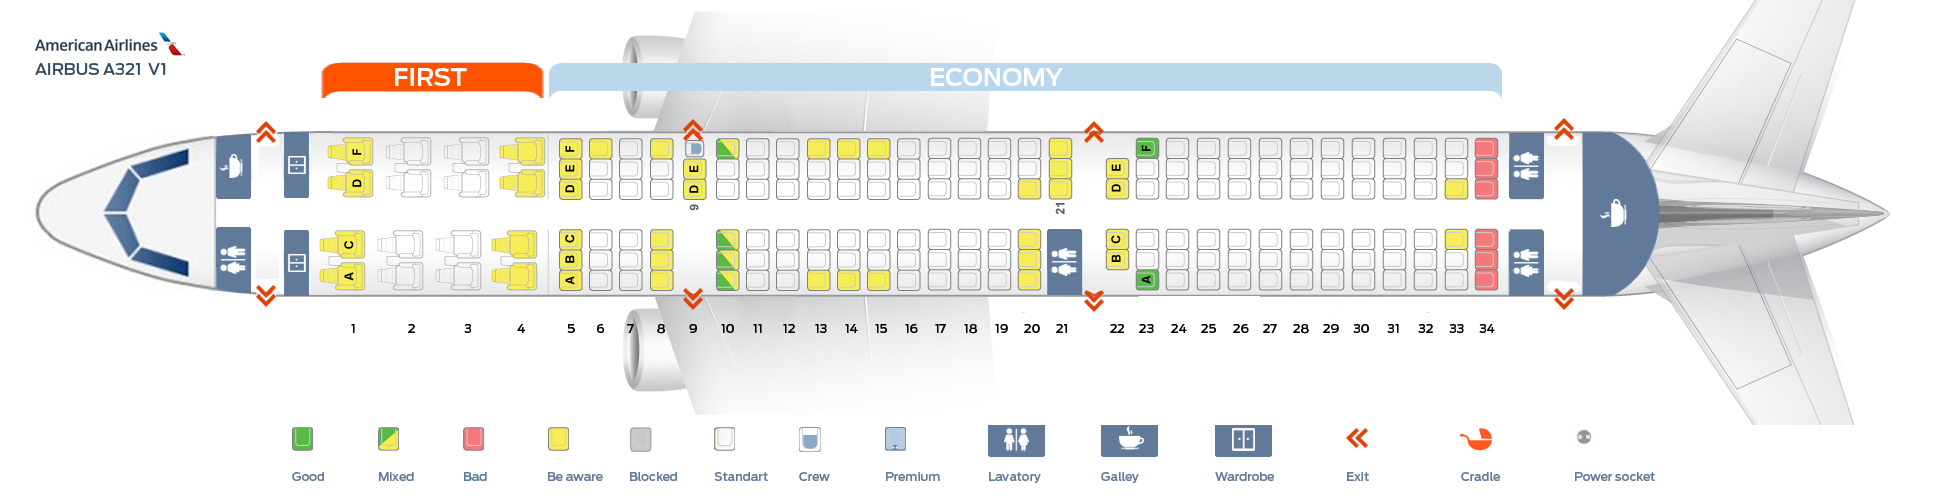 Frontier Airlines Seating Chart Airbus A321 | Brokeasshome.com